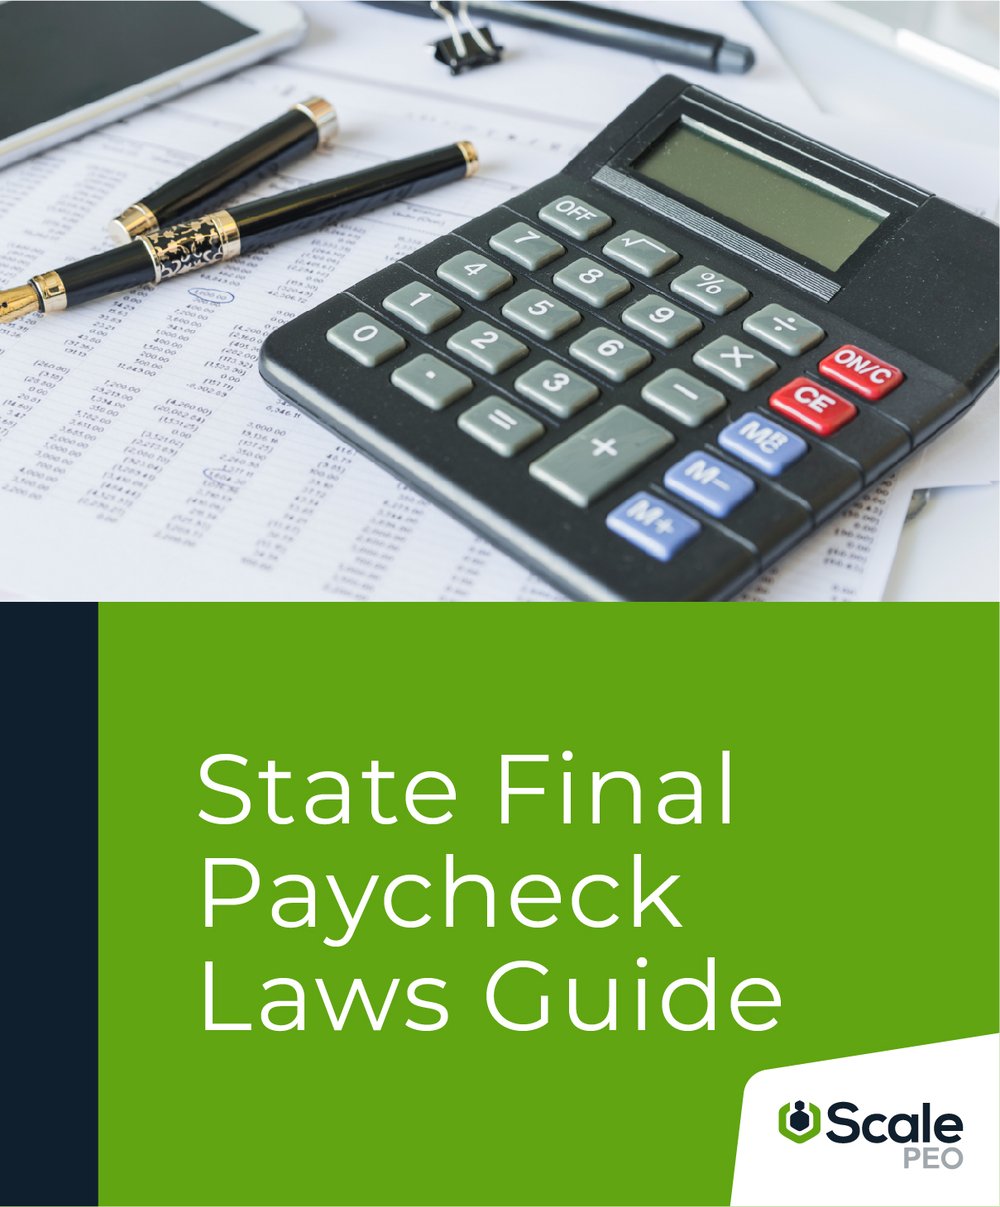 State Final Paycheck Laws Guide Guide ScalePEO